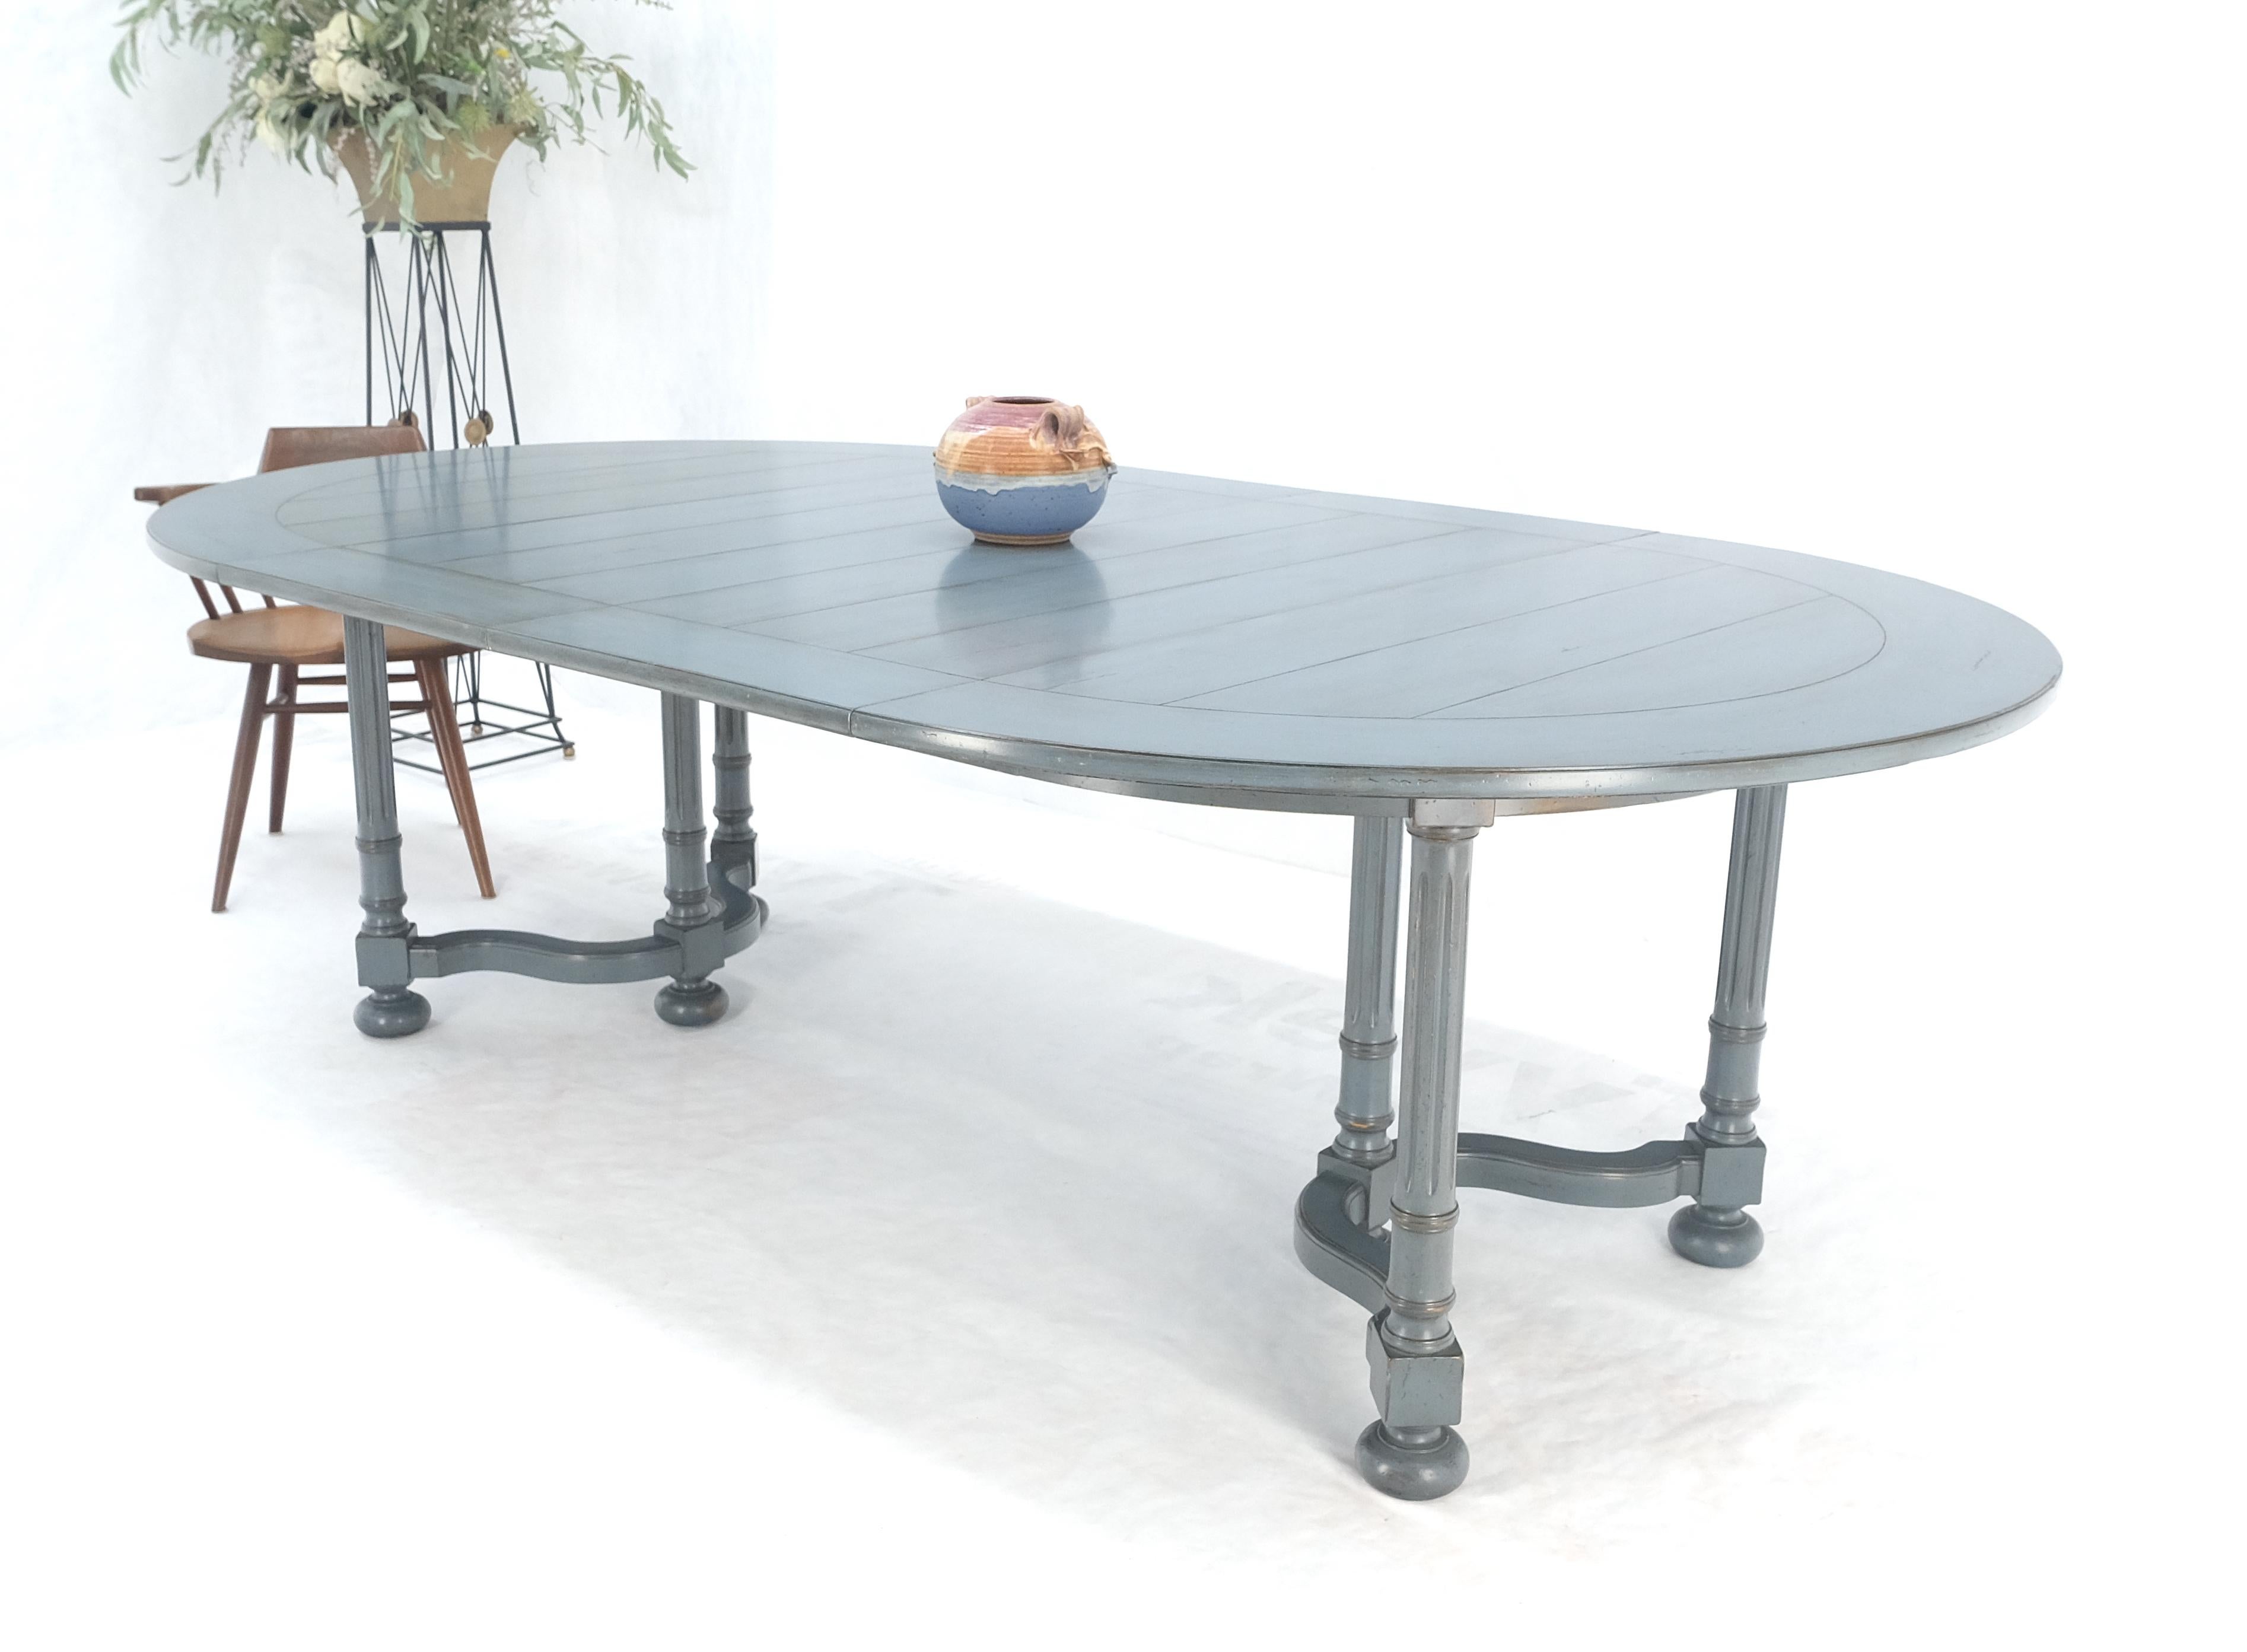 Baker Round Blue Grey Wash Milk Paint Style Finish Dining Table 2 Leaves MINT! For Sale 2